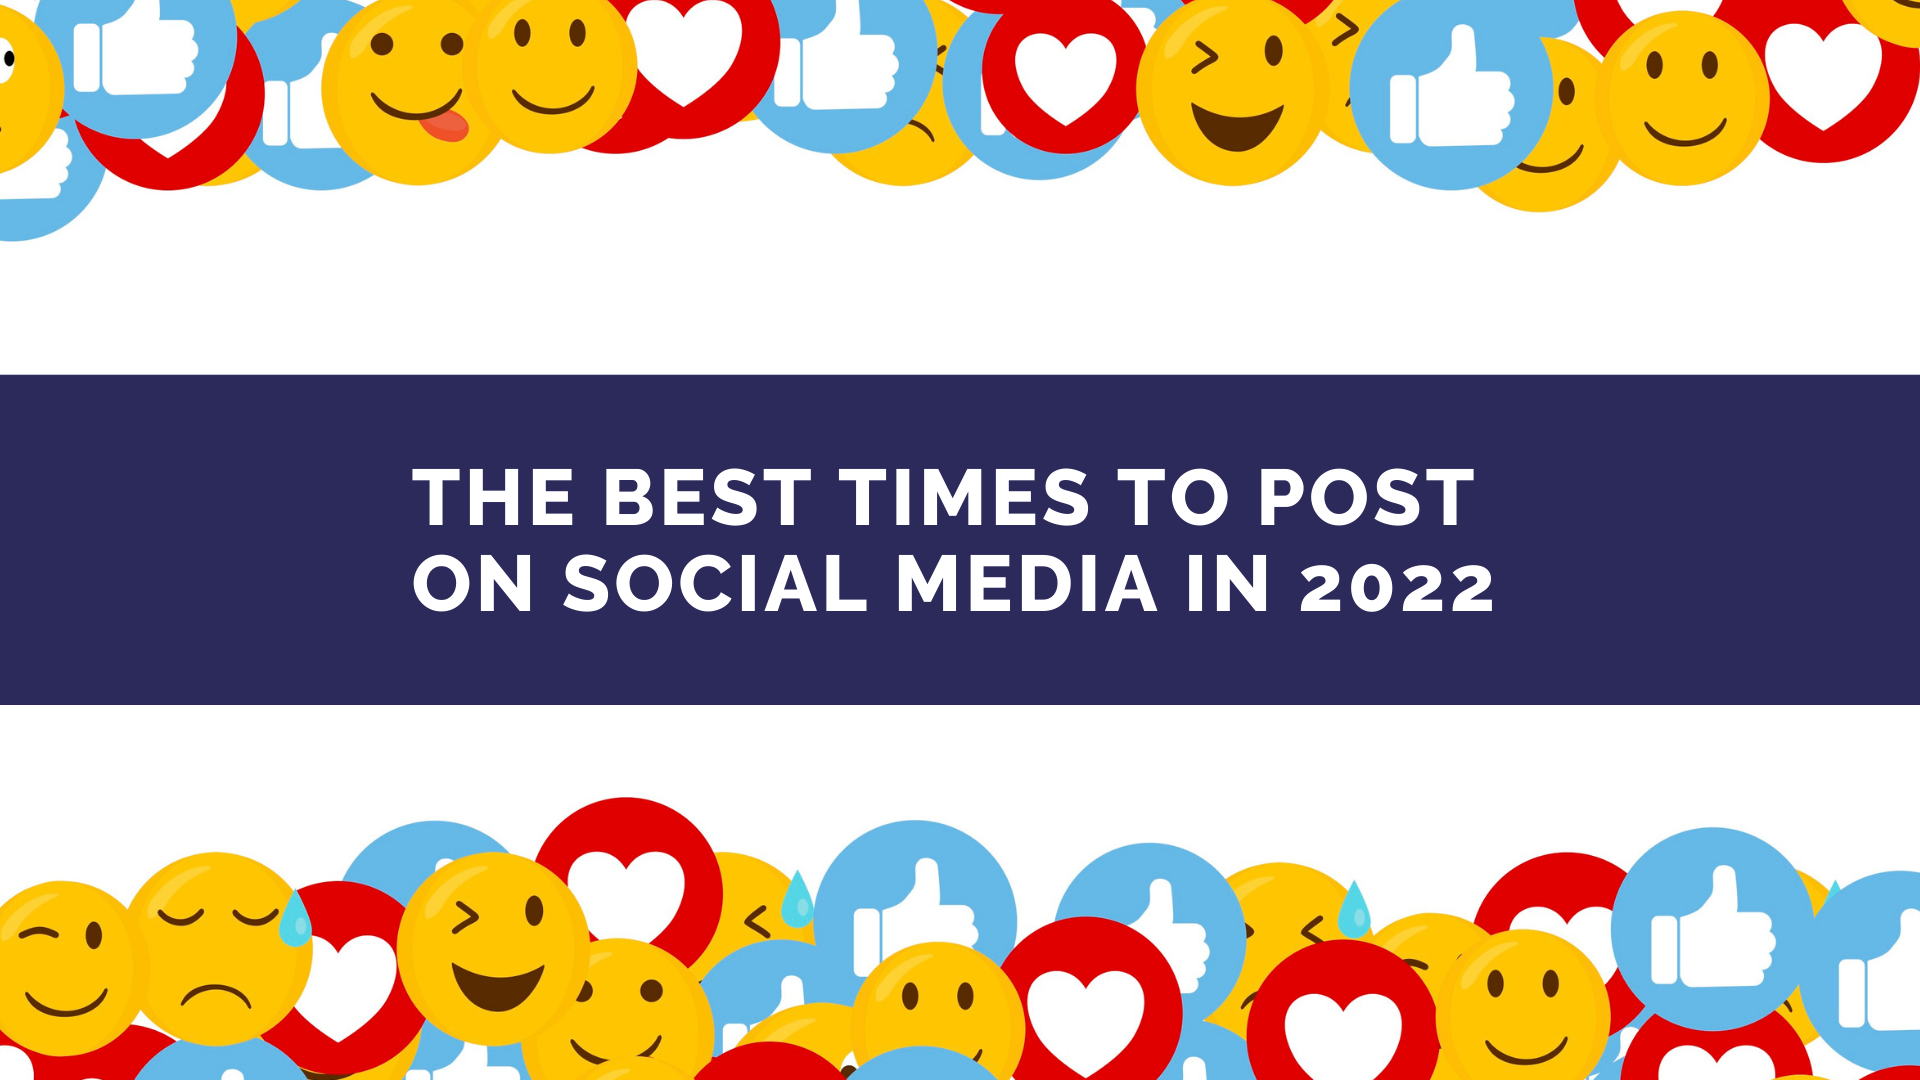 The Best Times To Post On Social Media In 2022